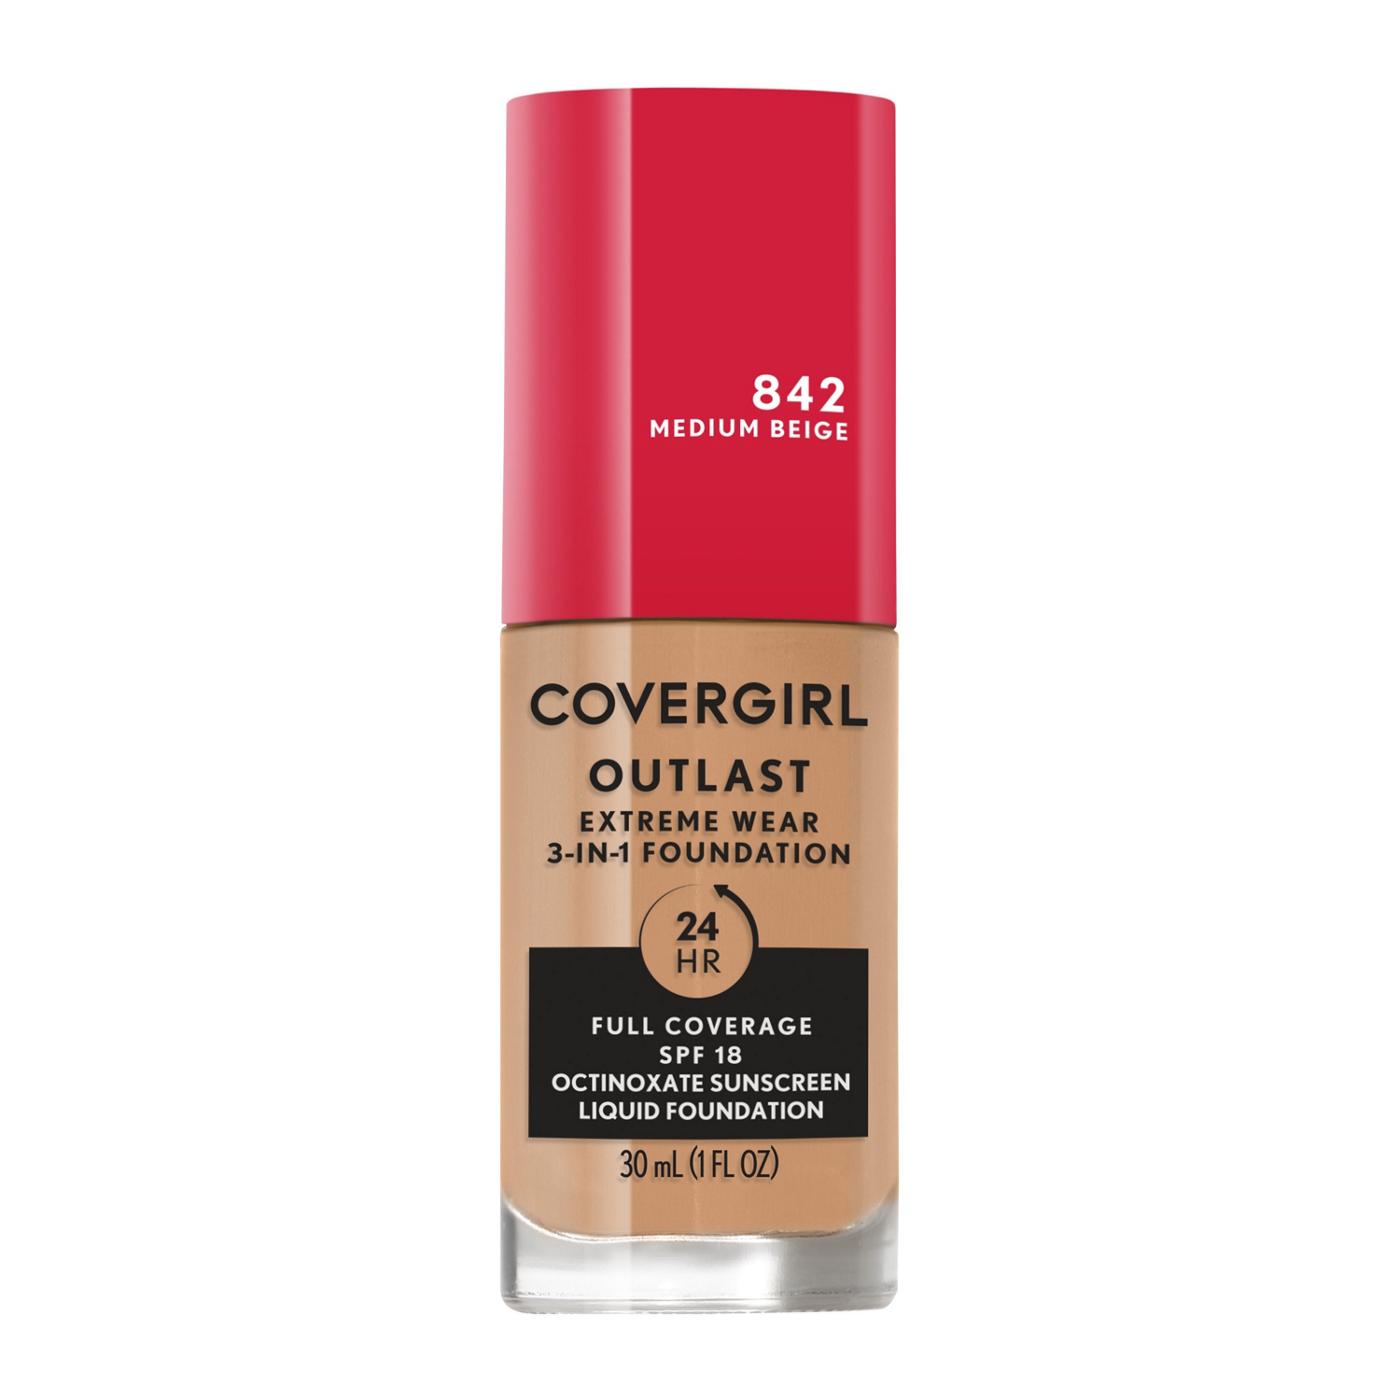 Covergirl Outlast Extreme Wear Liquid Foundation 817 Golden Natural; image 1 of 11